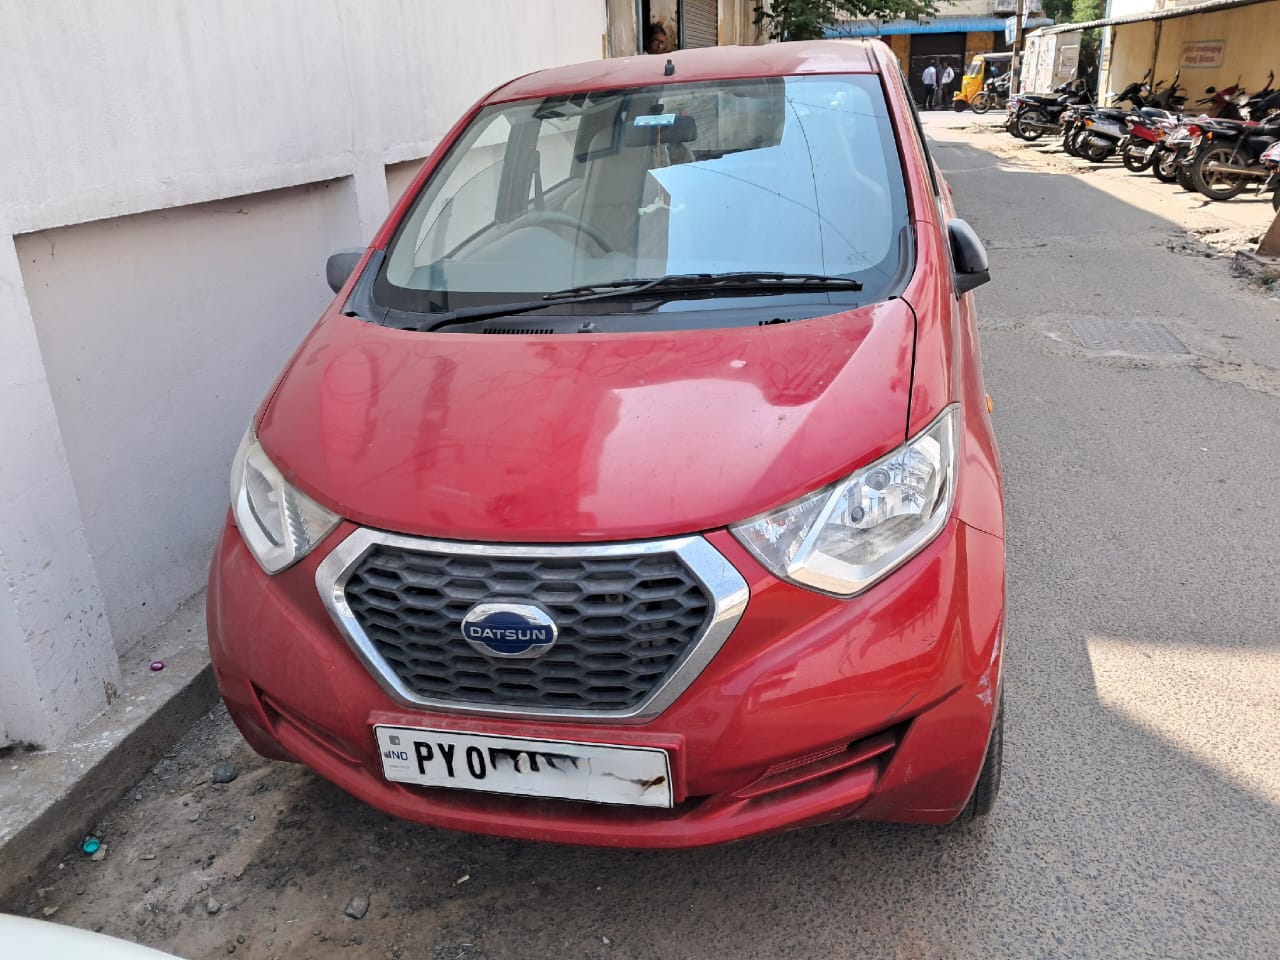 6503-for-sale-Datsun-Redi-Go-Petrol-First-Owner-2016-PY-registered-rs-285000